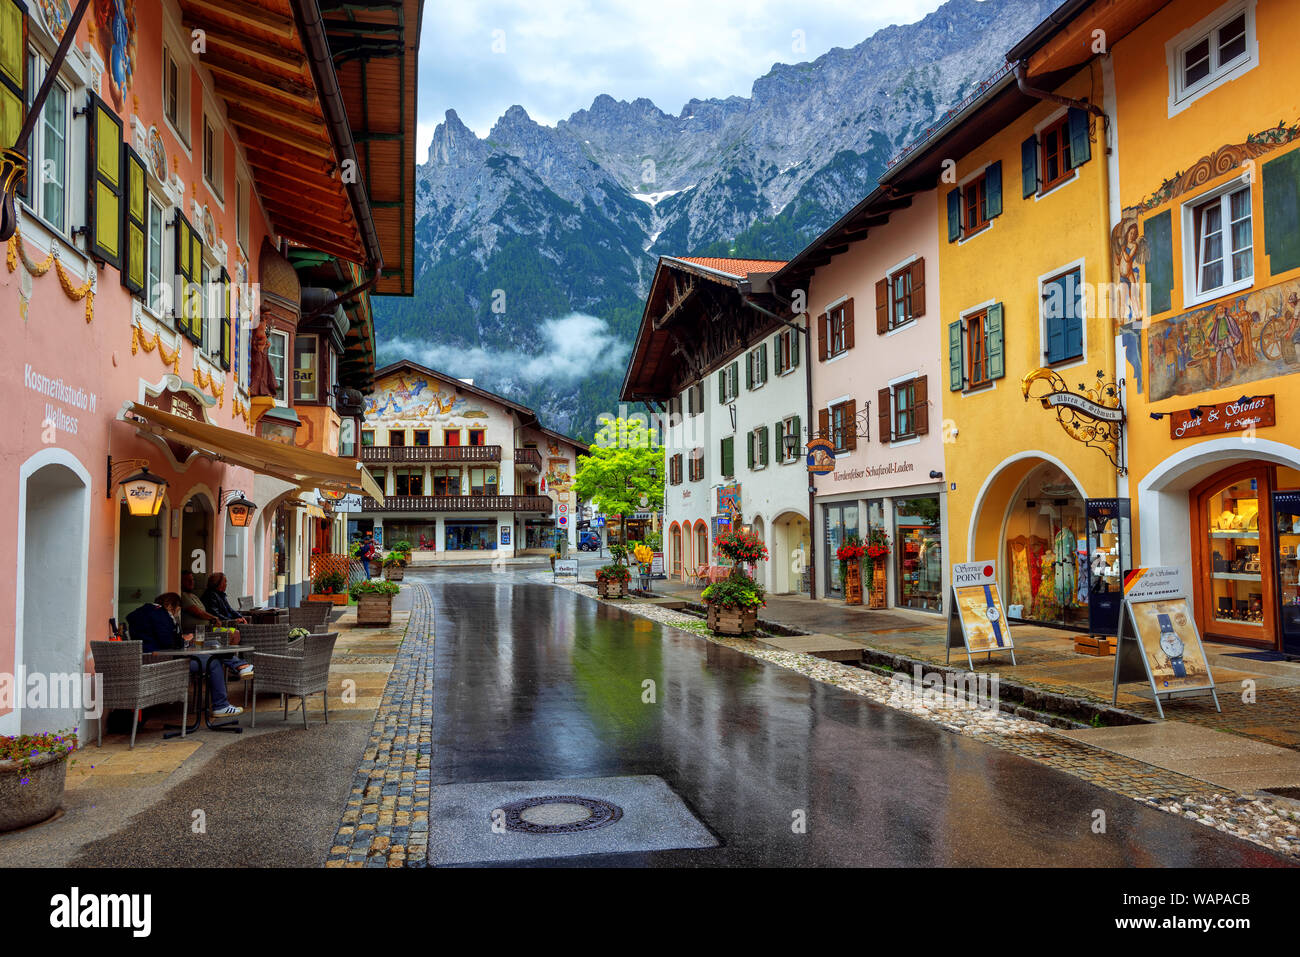 Mittenwald, Germany - 11 July 2019: Colorful painted houses in the Old town of Mittenwald, a popular tourist destination in Alps mountains, Bavaria Stock Photo